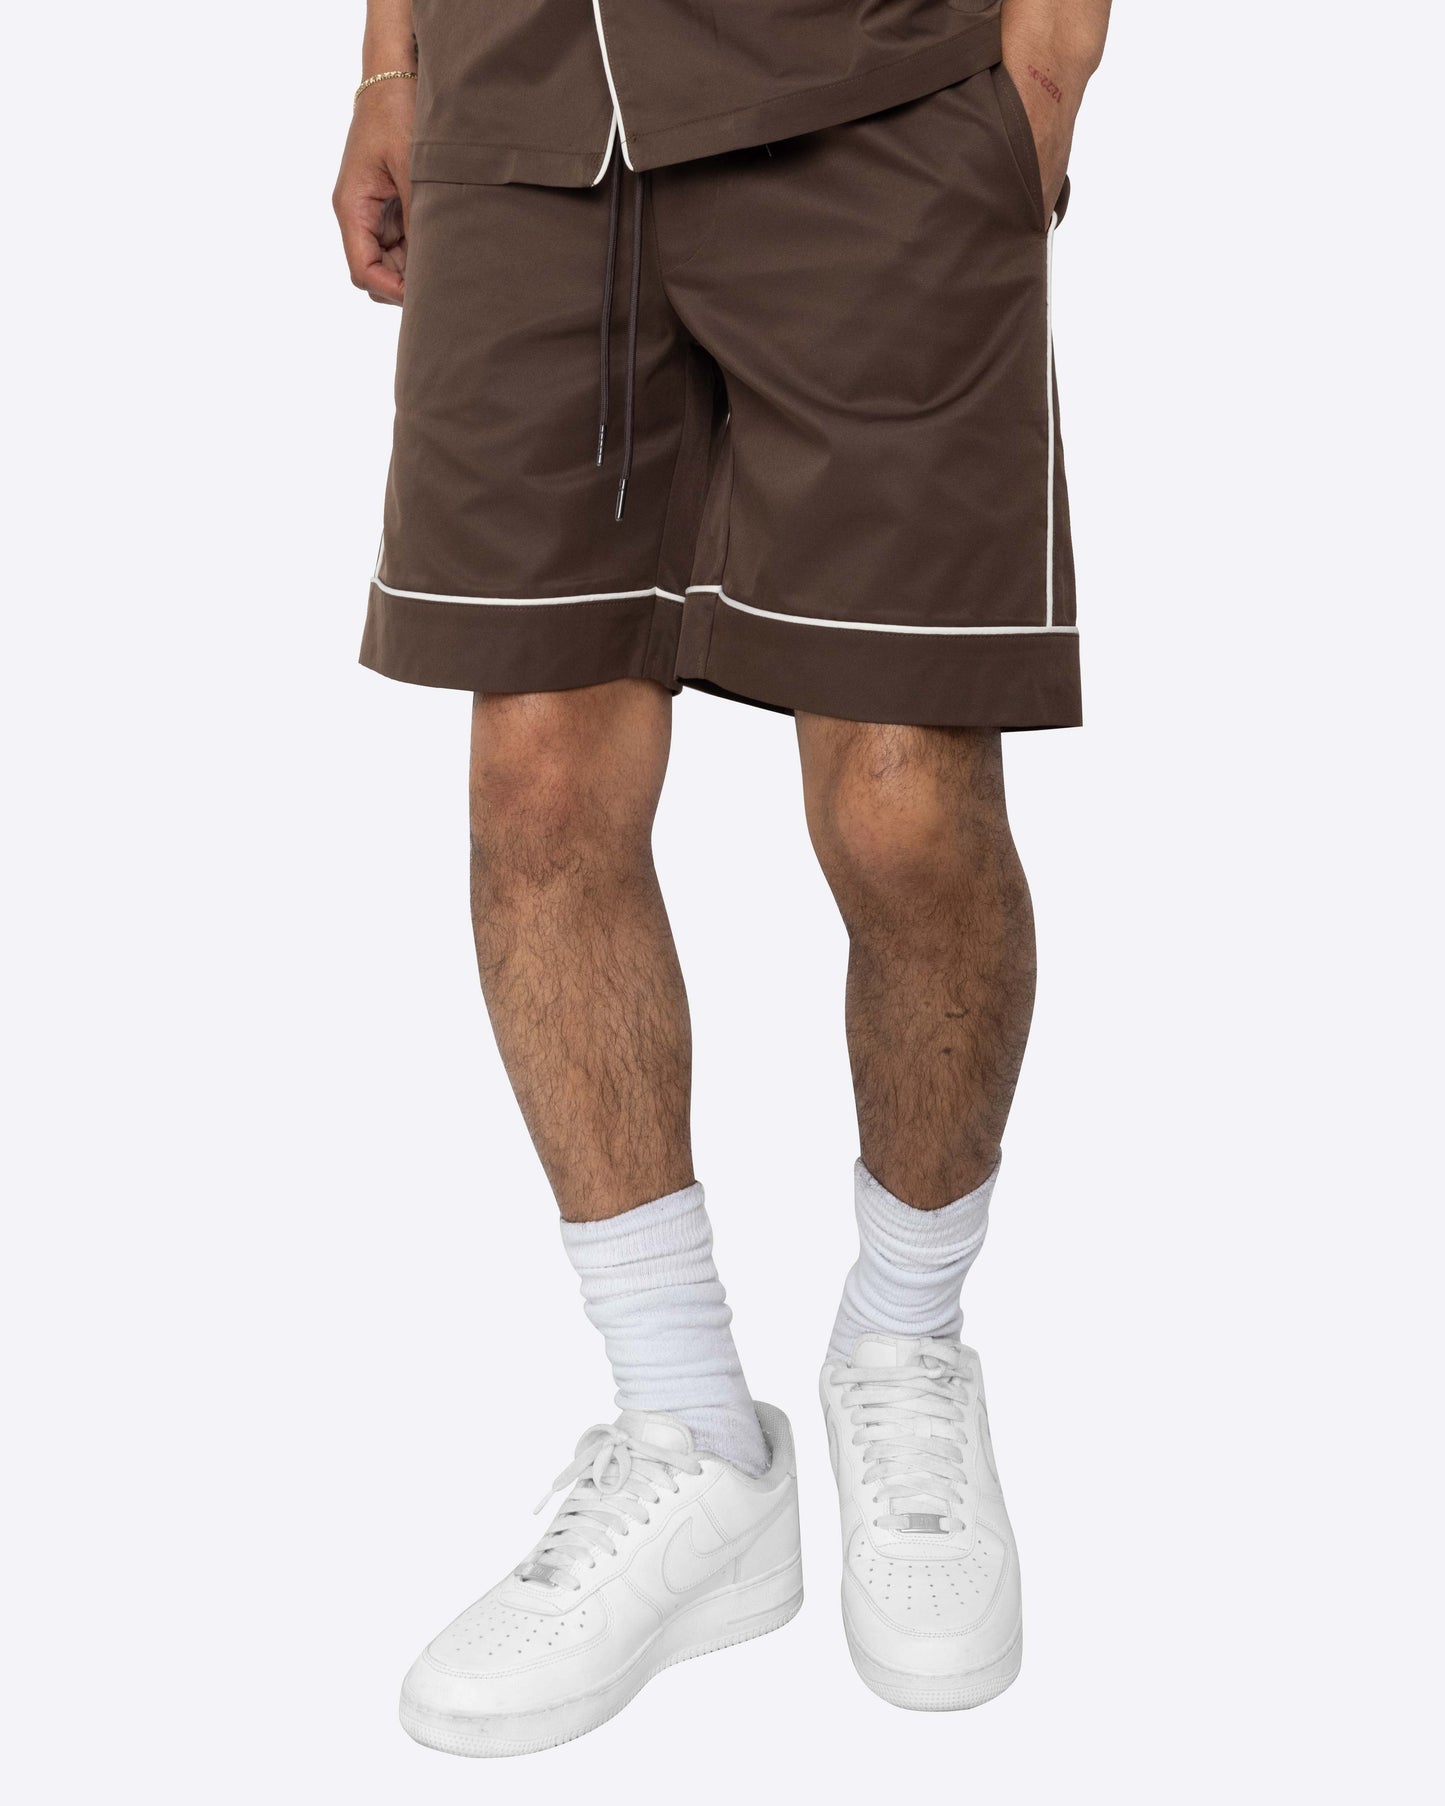 EPTM DOWNTOWN SHORTS-BROWN